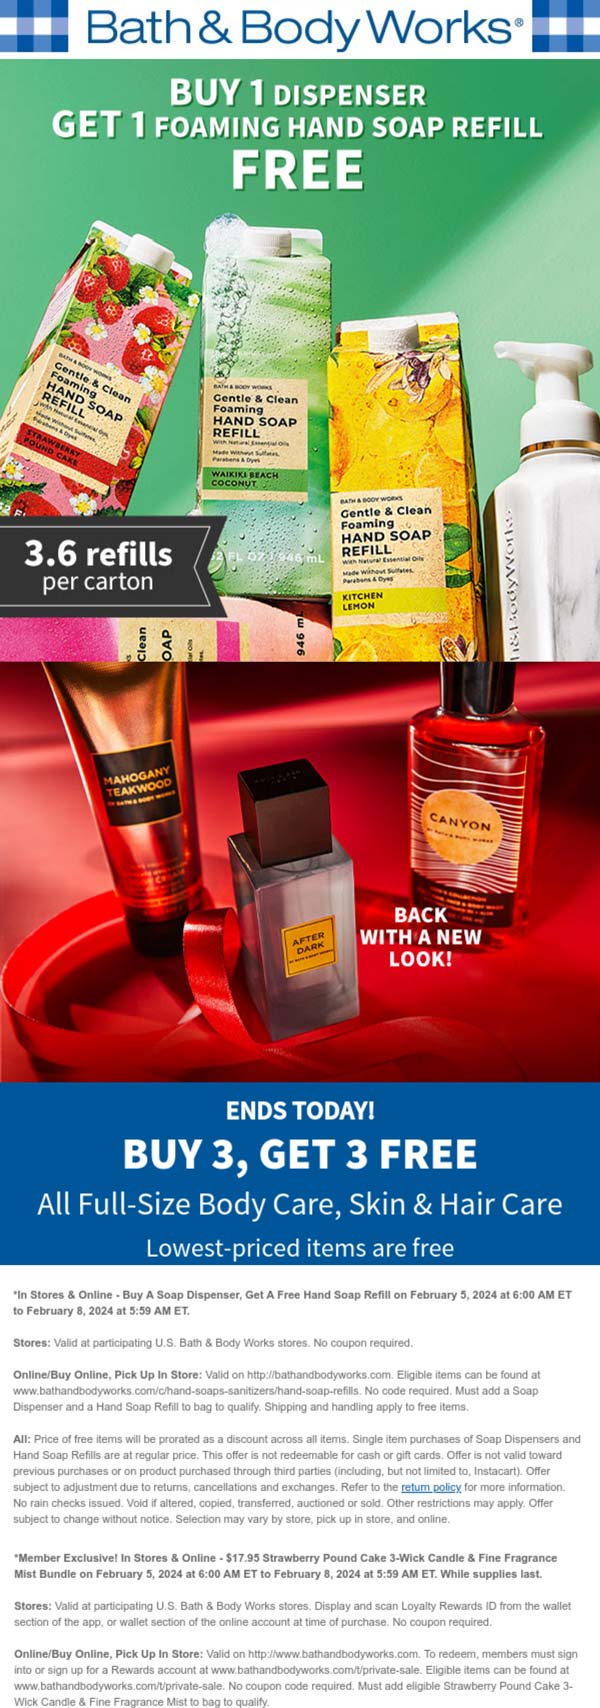 Bath & Body Works stores Coupon  6-for-3 today on body skin hair care & more at Bath & Body Works, ditto online #bathbodyworks 